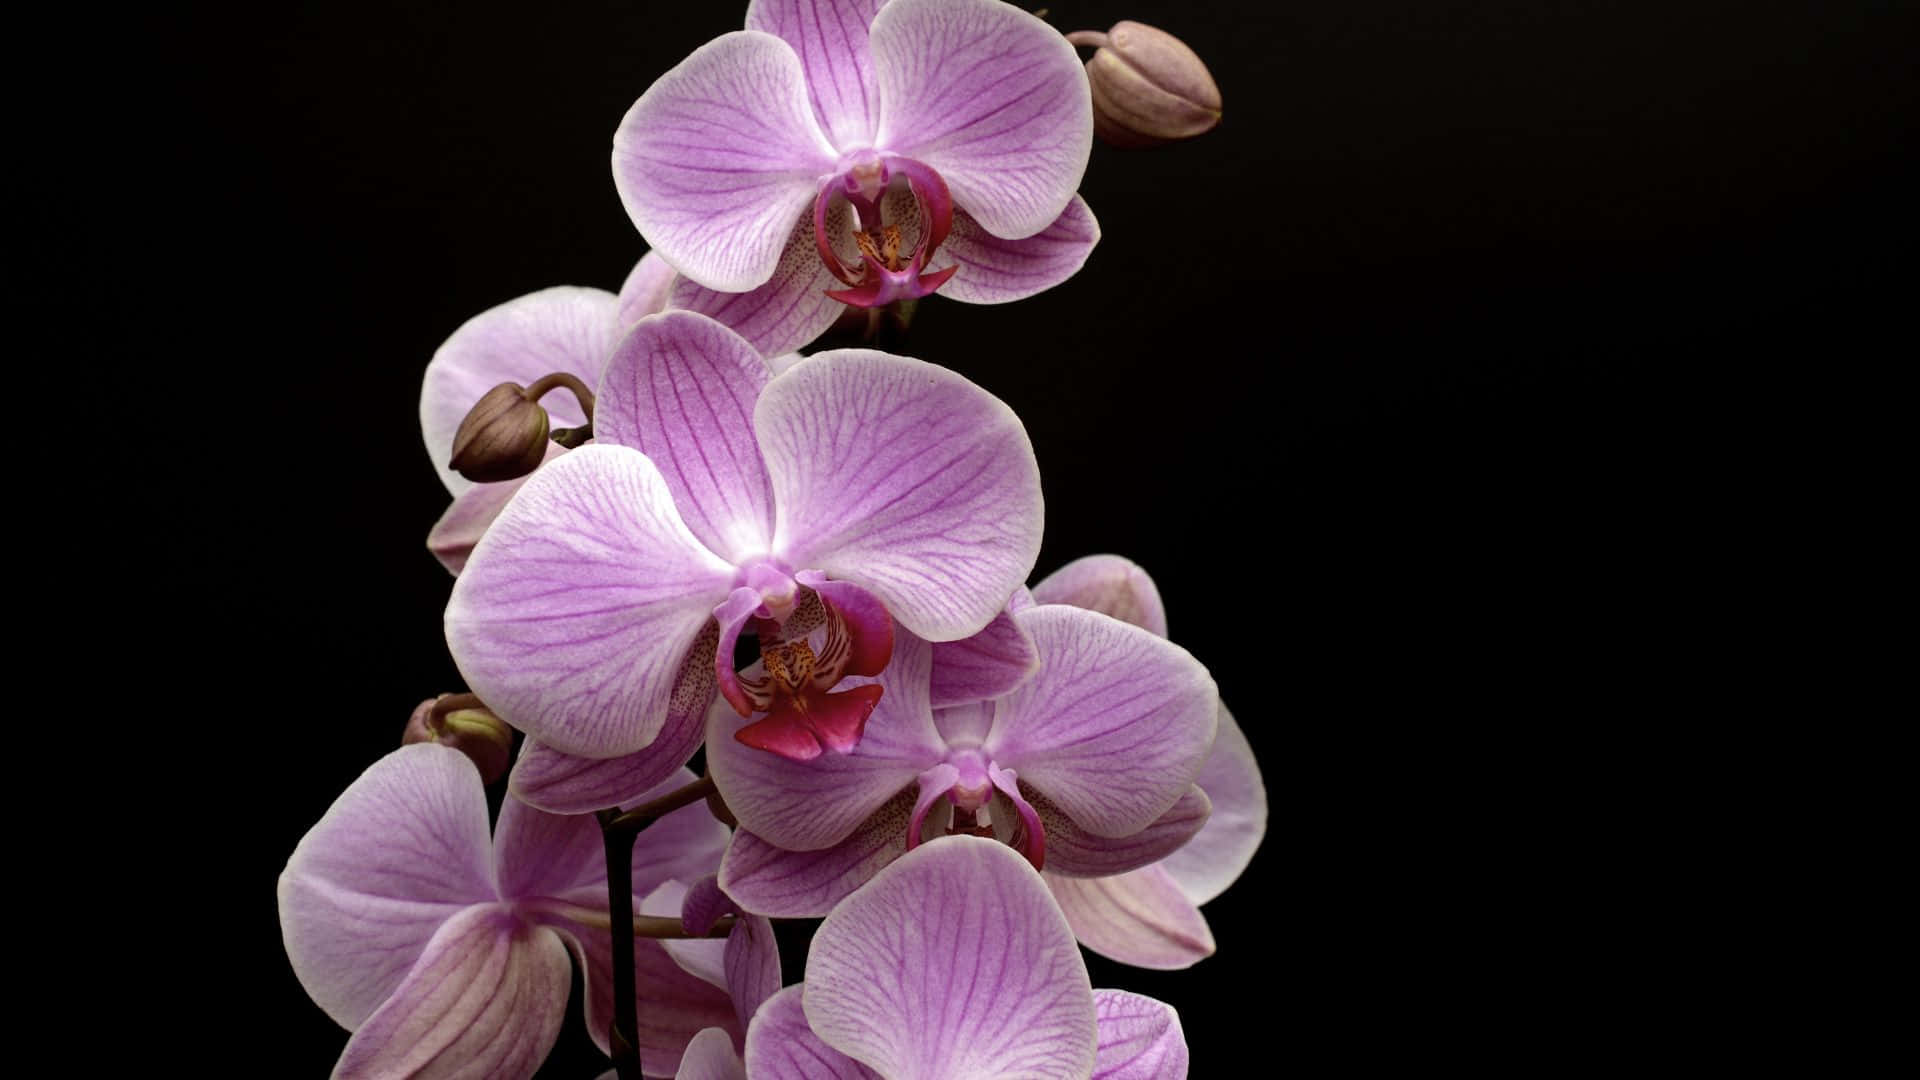 A close-up of a beautiful orchid flower